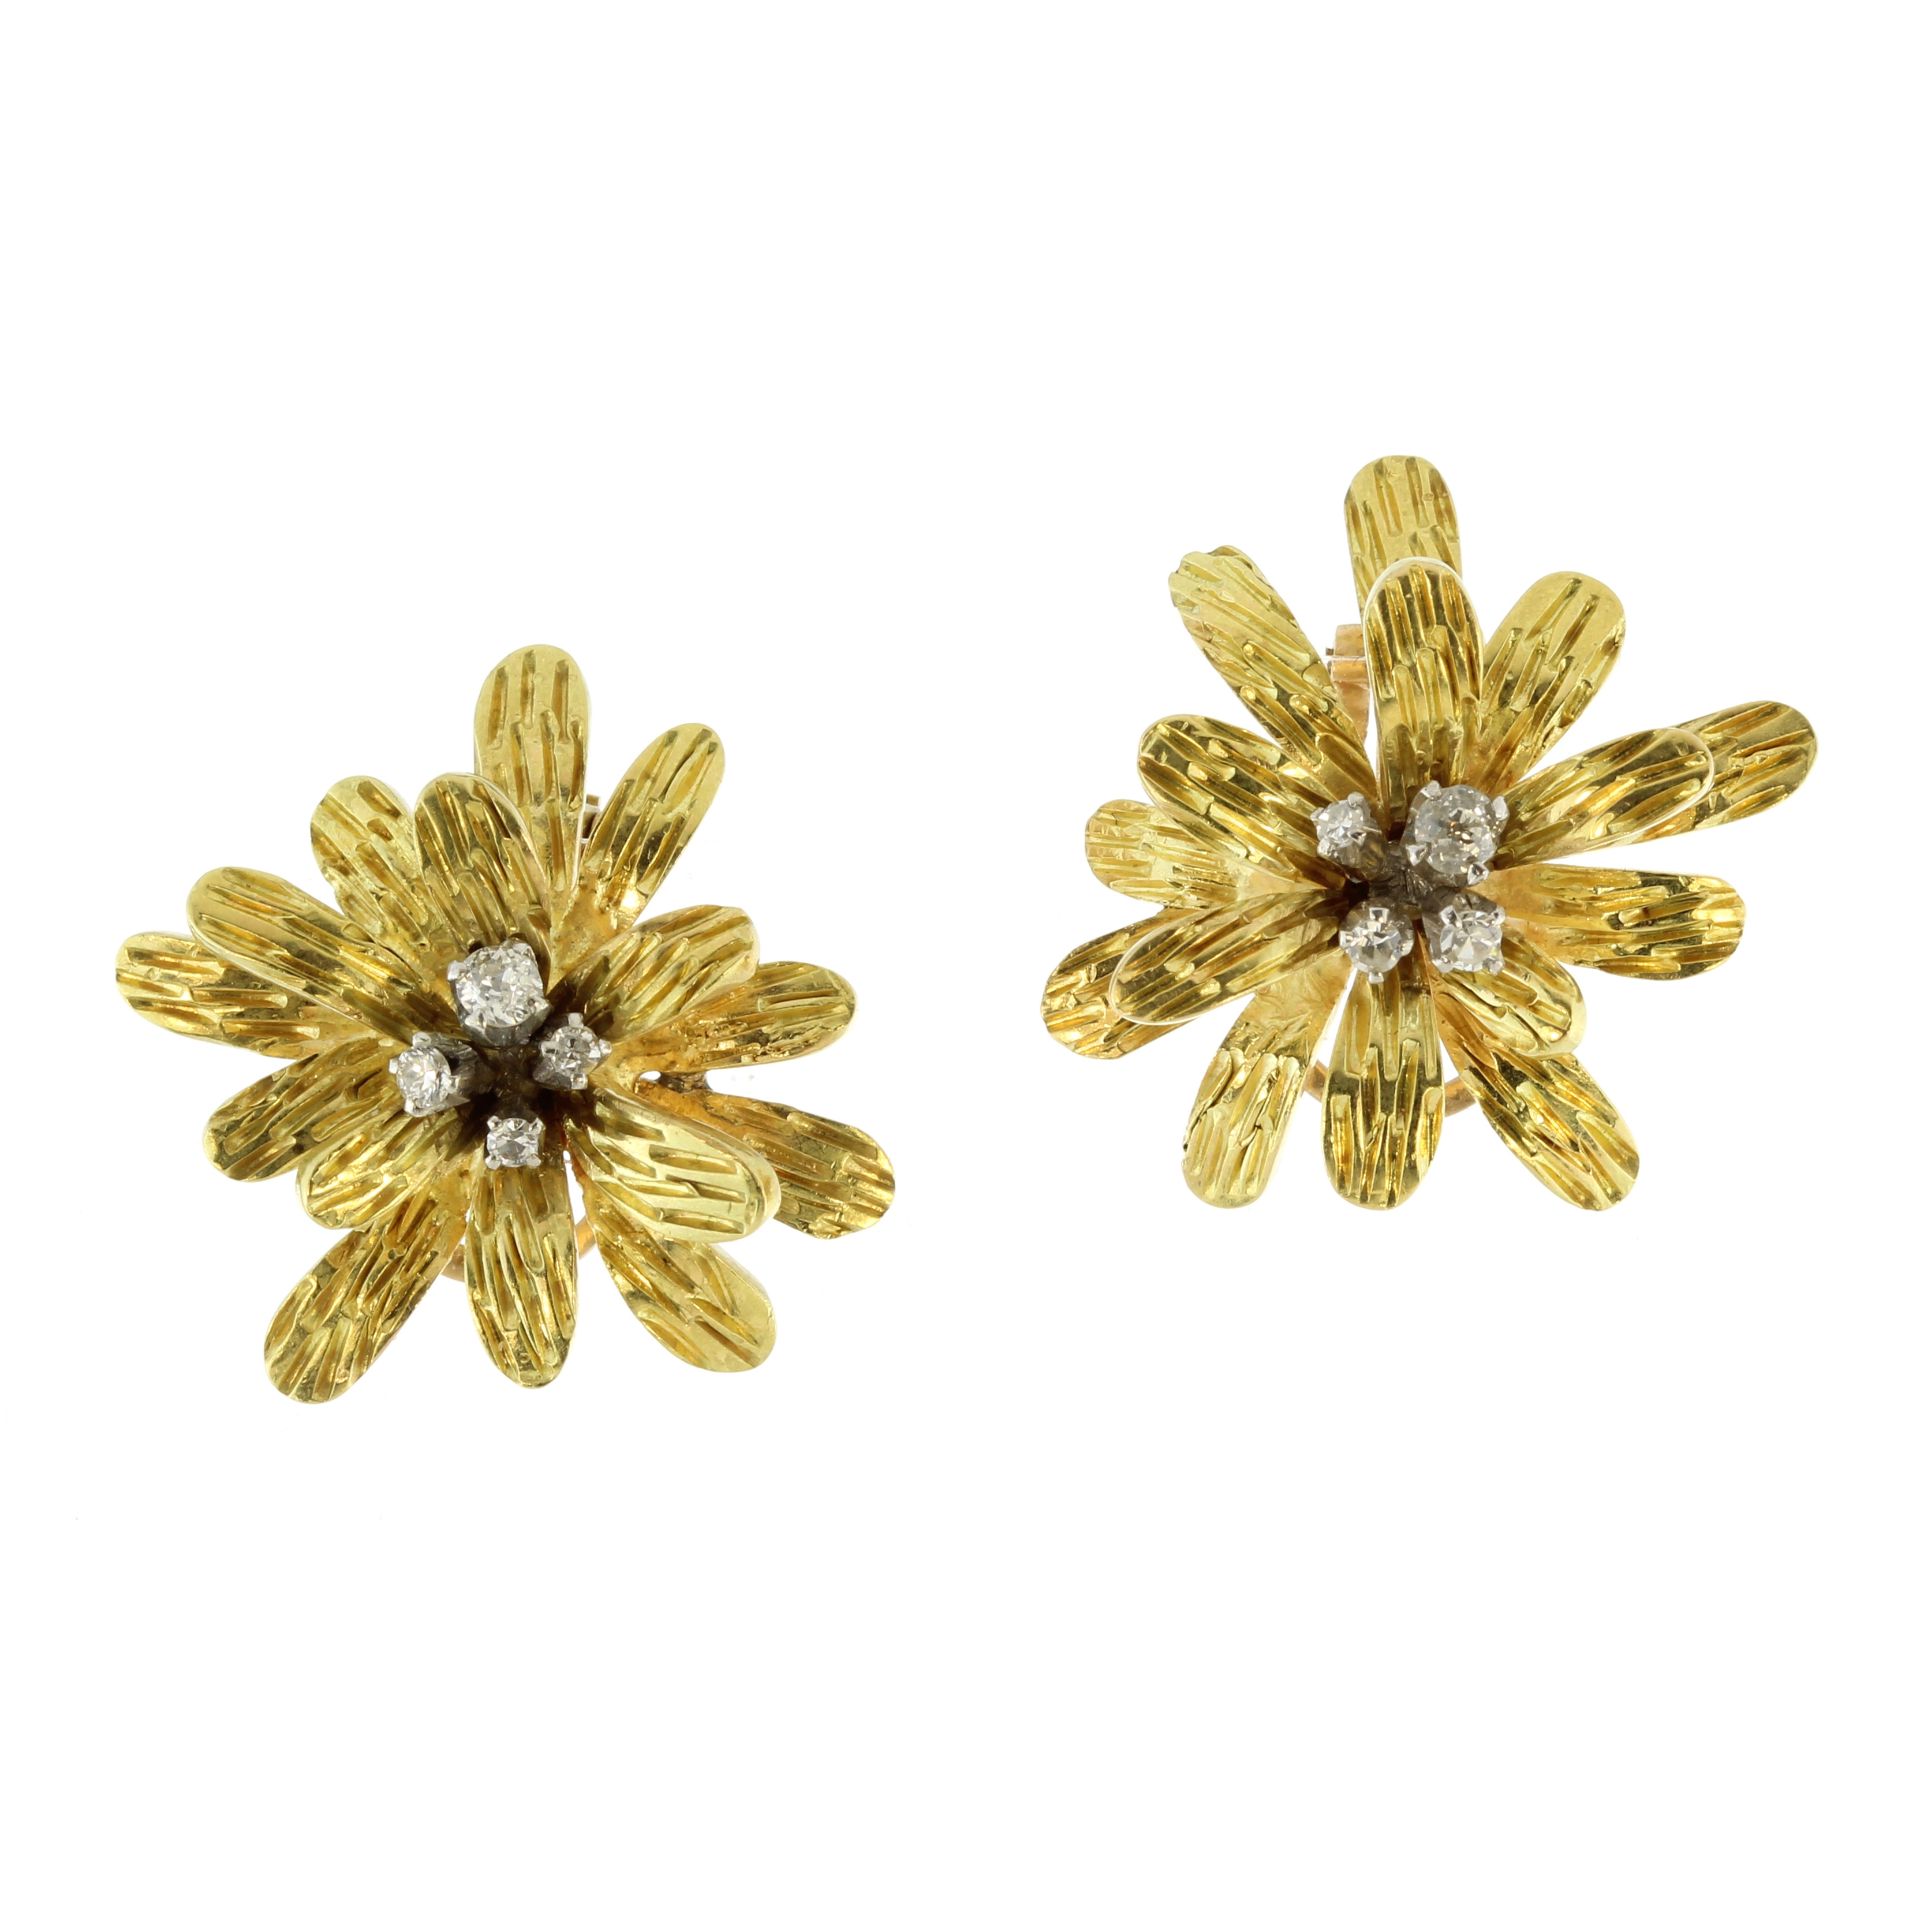 A pair of diamond flower clip earrings in 18ct yellow gold each designed as a flower with textured